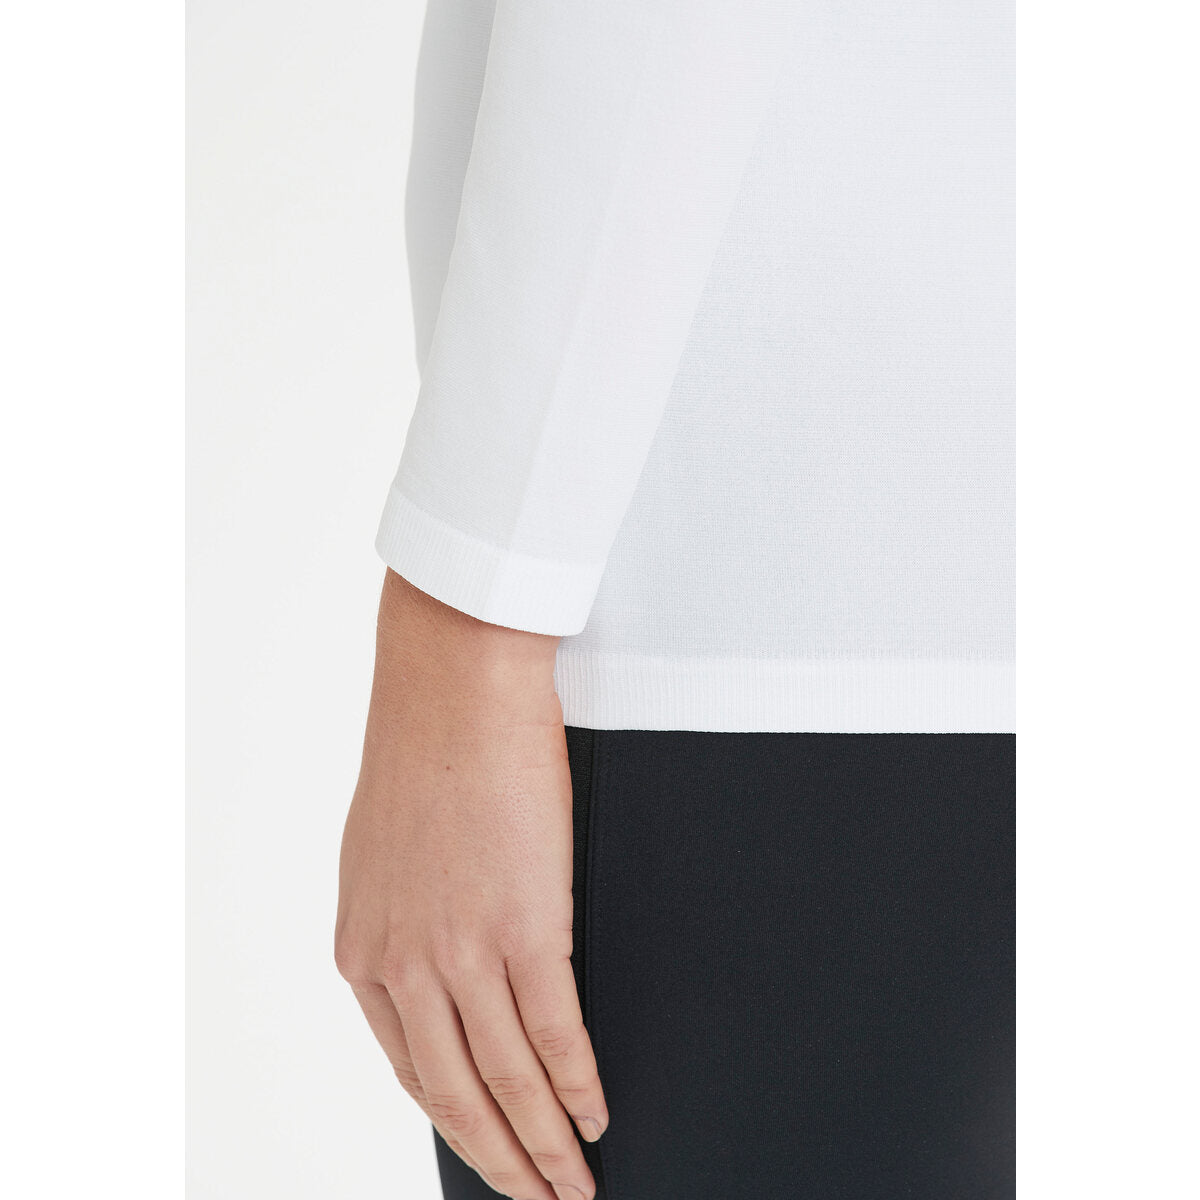 Athlecia Julee Womenswear Loose Fit Long Sleeve Seamless Tee - White 4 Shaws Department Stores